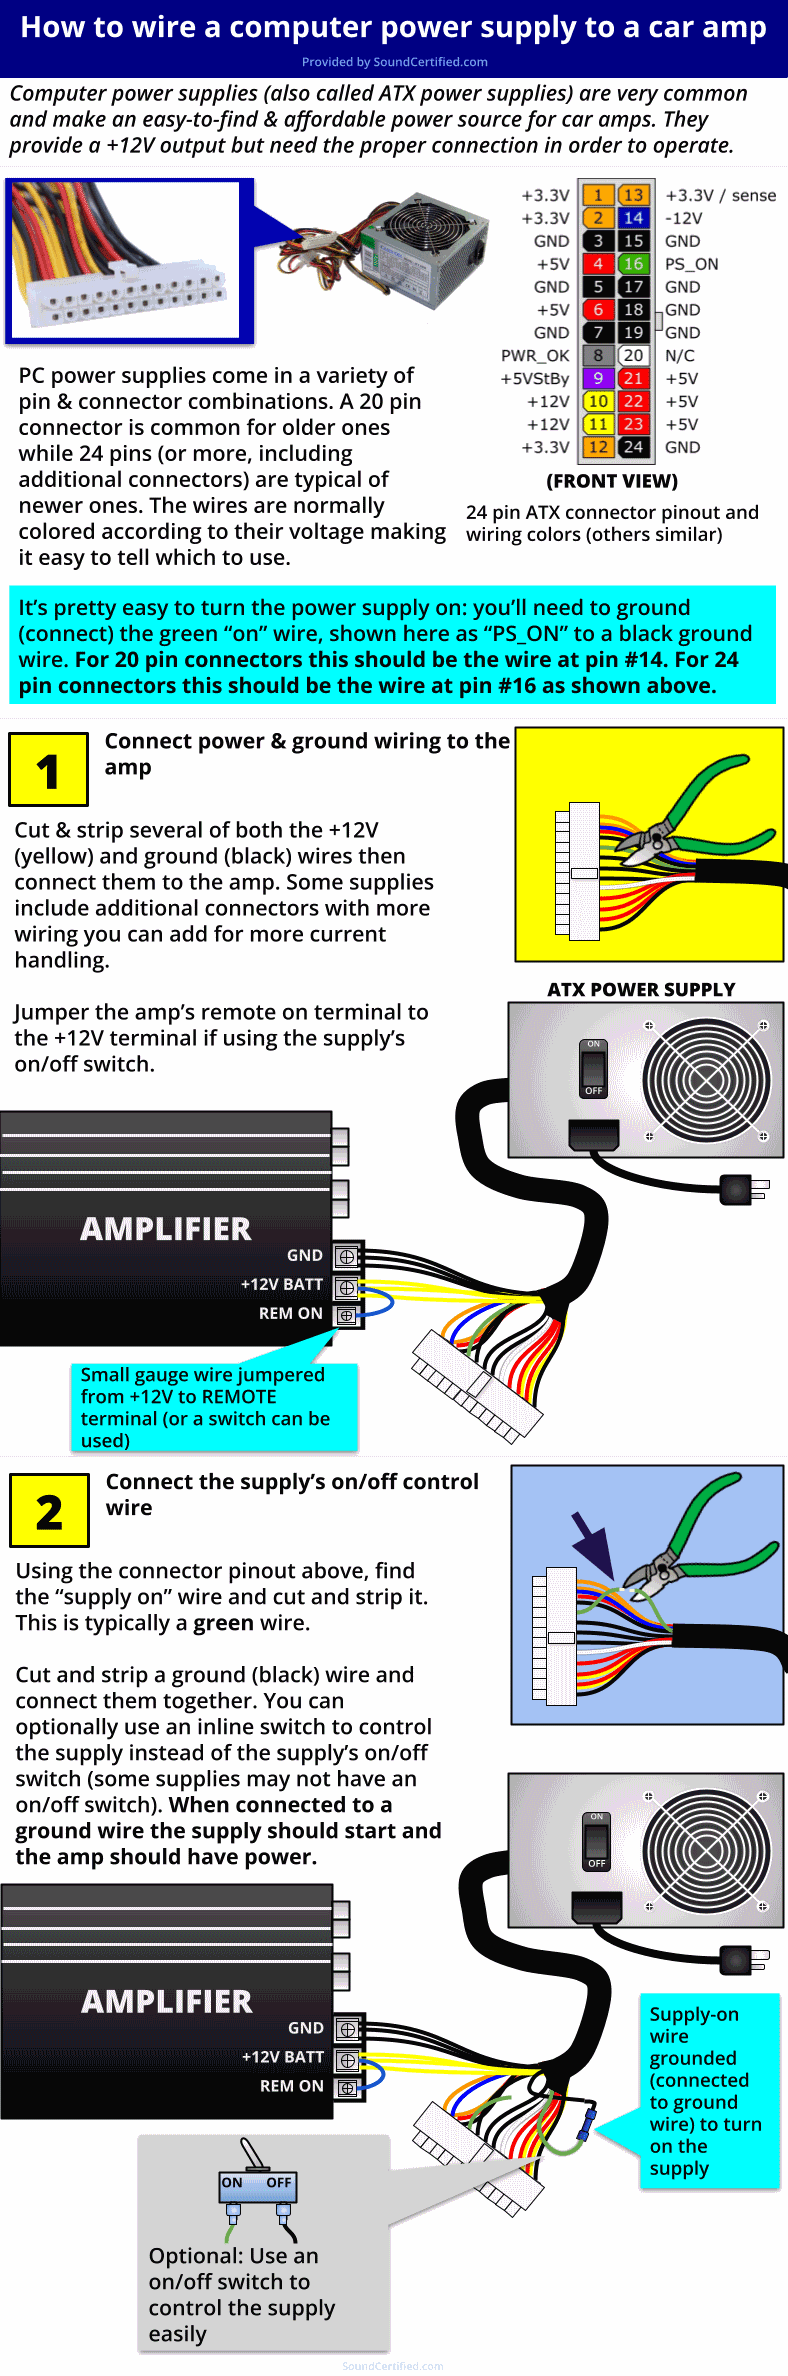 How to wire a computer power supply to a car amp diagram